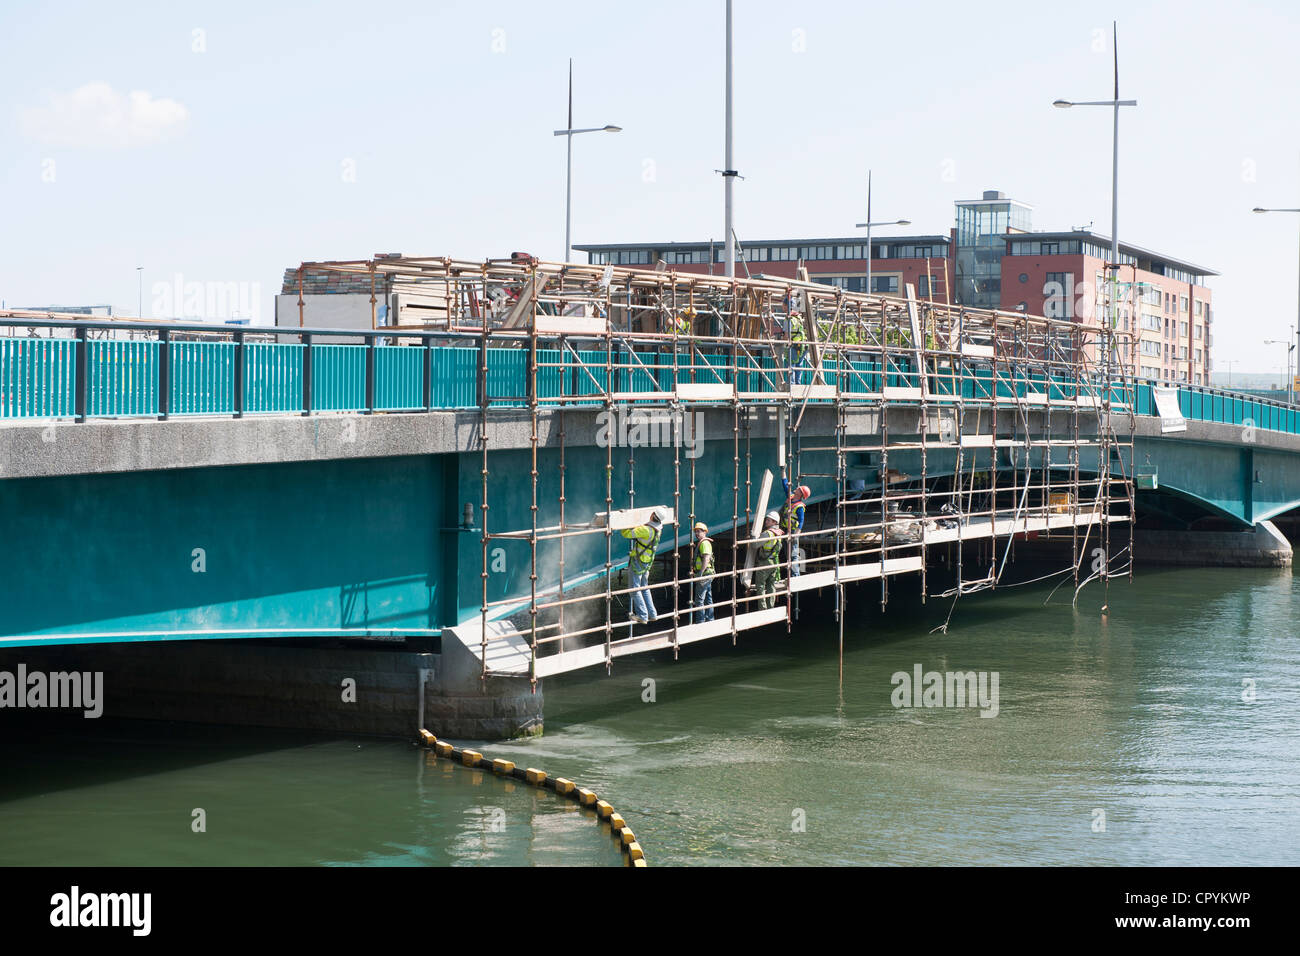 The Queen Elizabeth ll Bridge which spans the River Lagan being refurbished Stock Photo